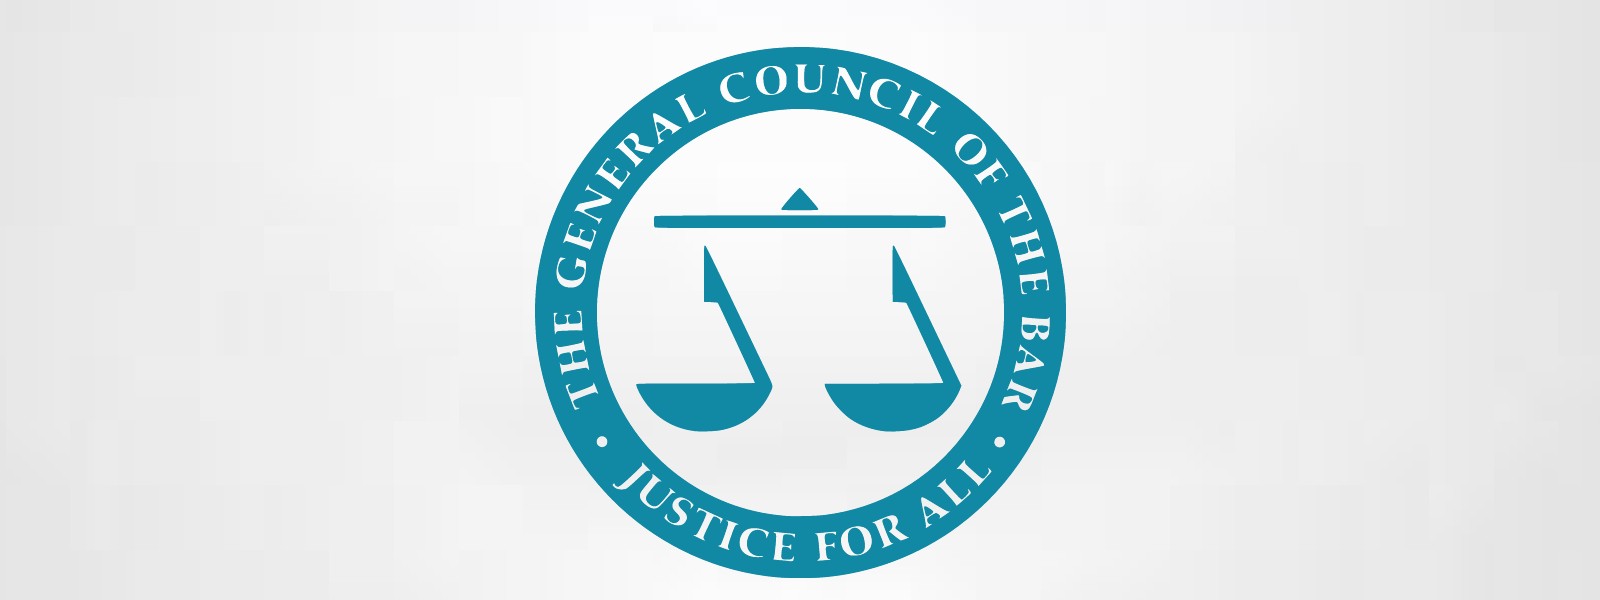 Hope Sri Lanka Parliament will ‘reconsider’ appropriateness of questioning Supreme Court judges – Bar Council of England and Wales